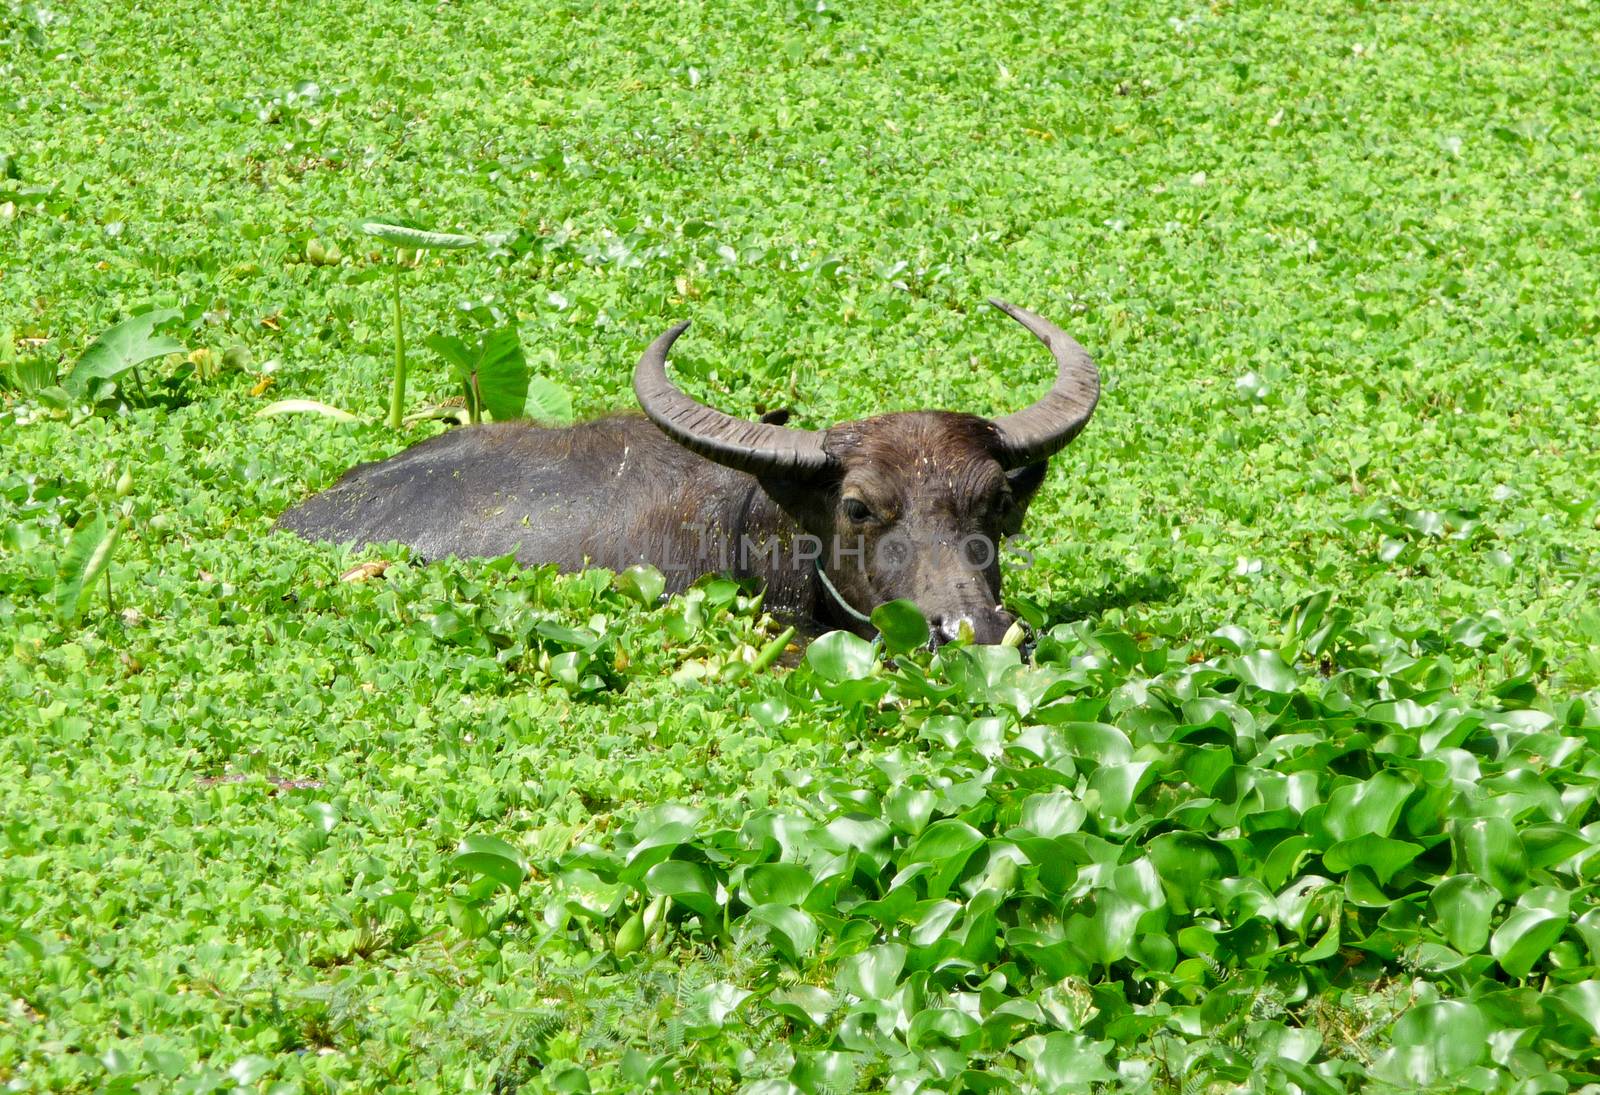 Water buffalo swimming in water lilies by AlexLeven